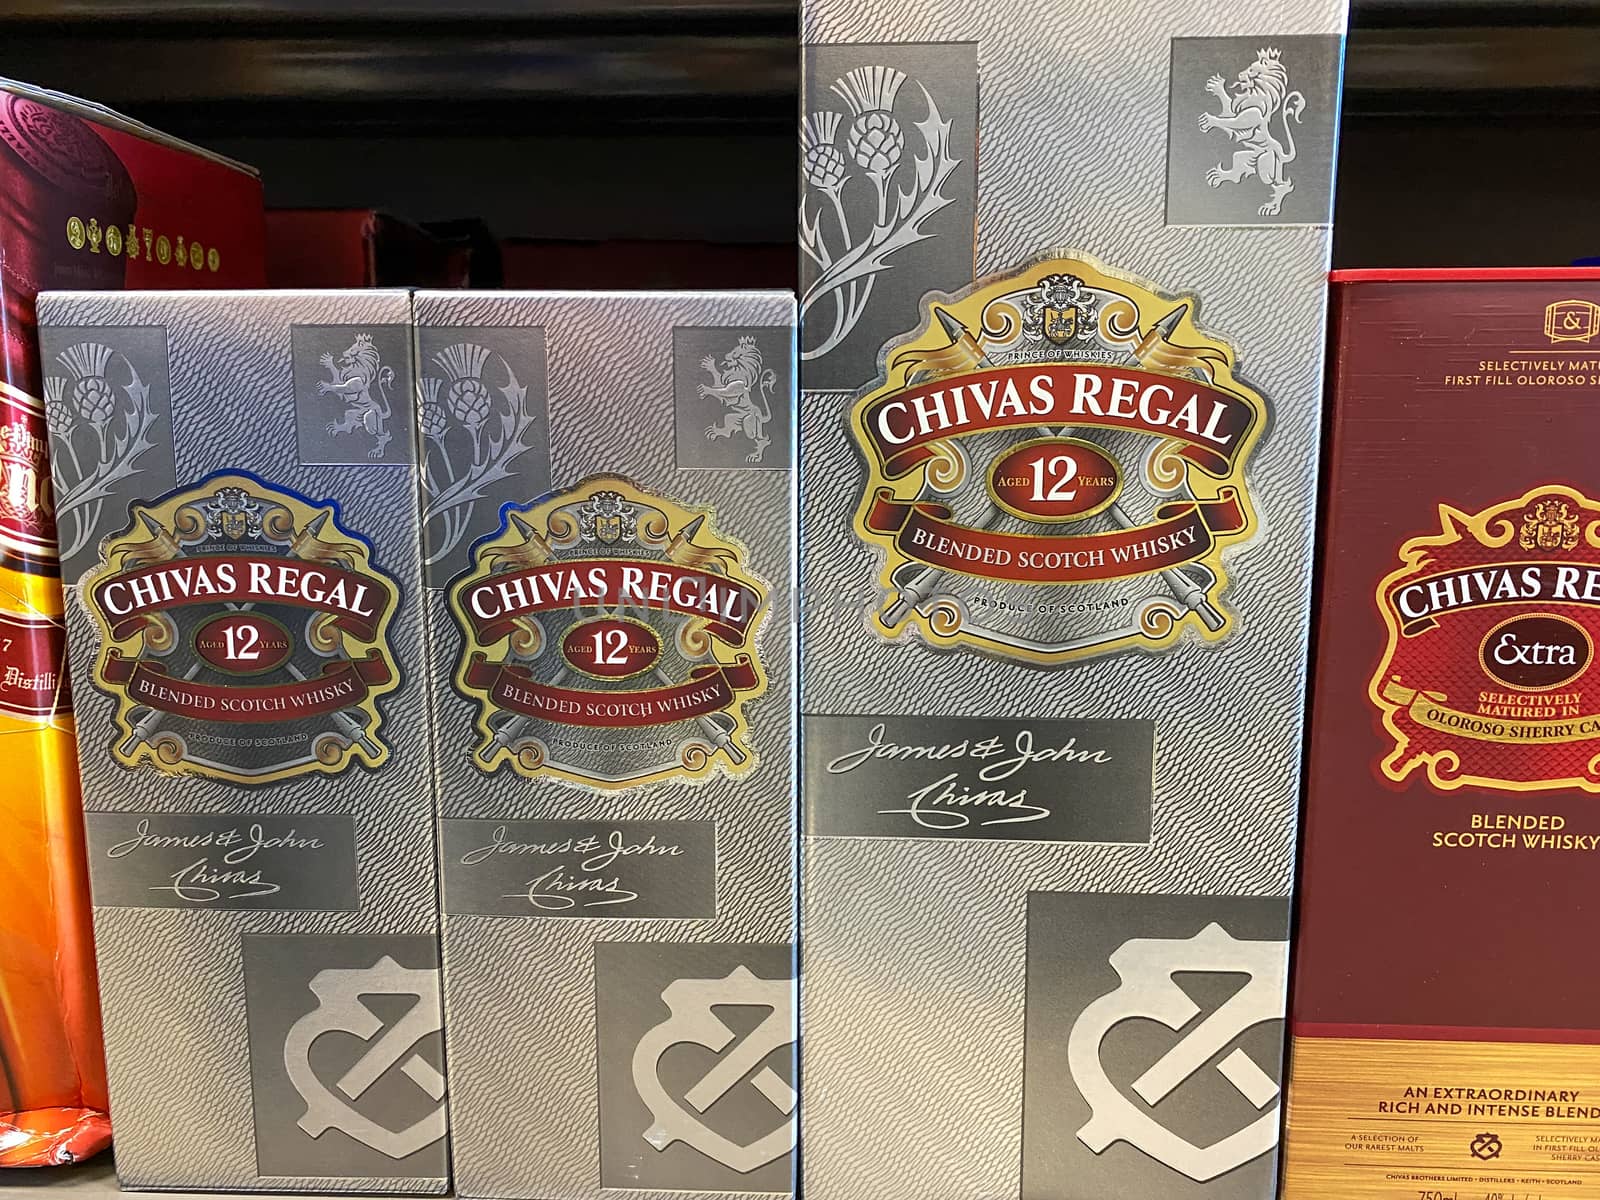 A display of Chivas Regal Blended Scotch Whisky at a Publix liqo by Jshanebutt